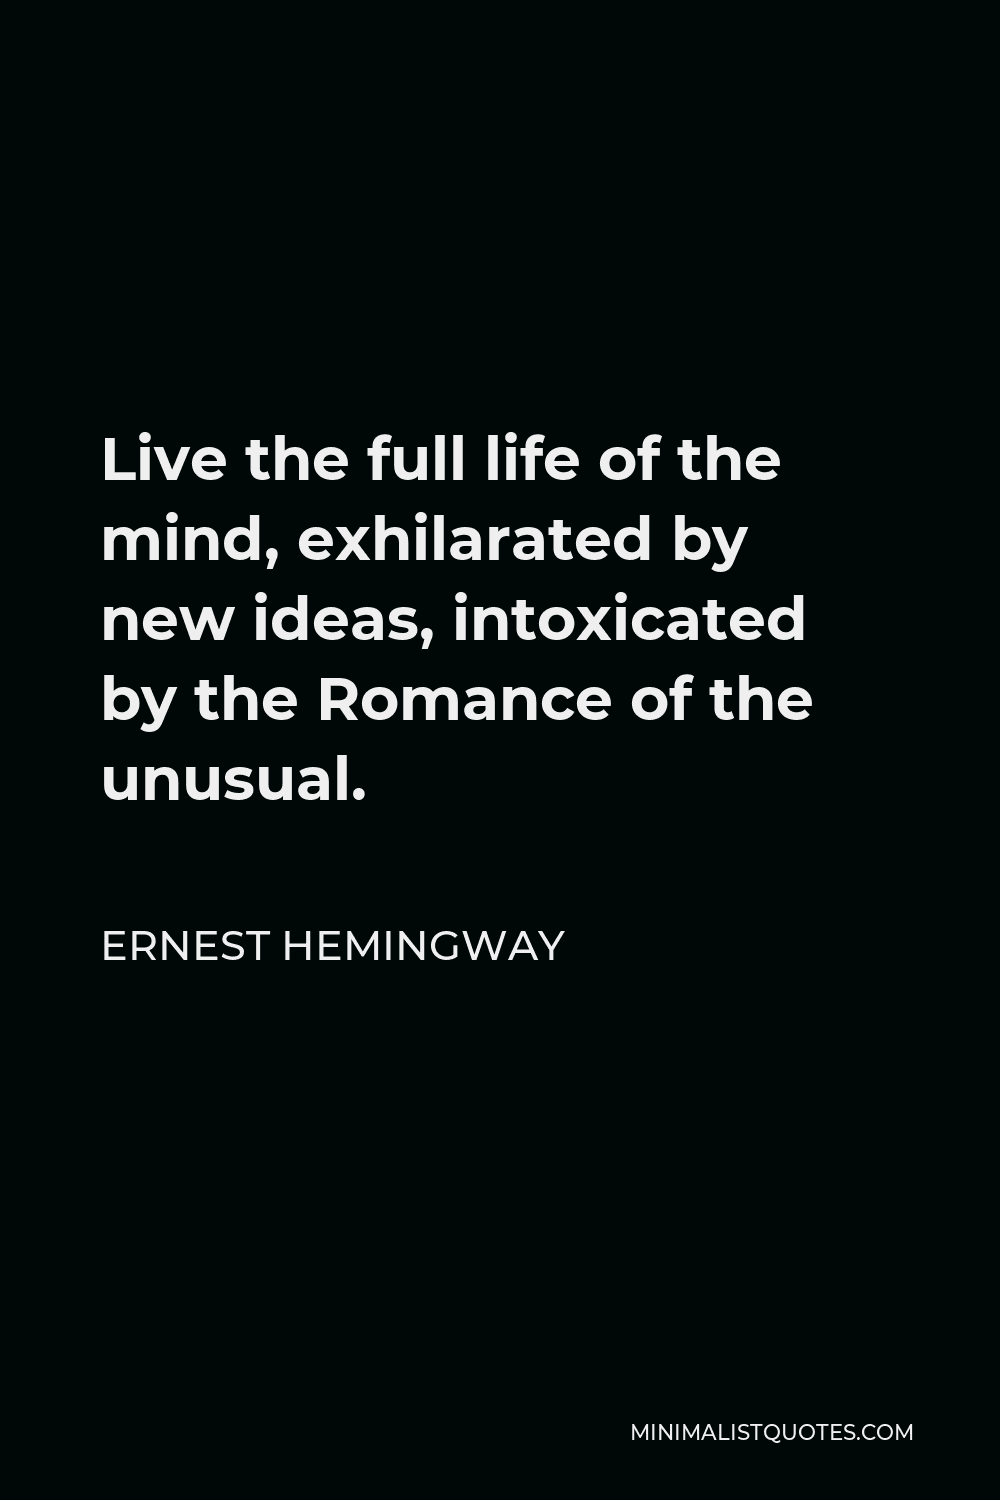 Ernest Hemingway Quote - Live the full life of the mind, exhilarated by new ideas, intoxicated by the Romance of the unusual.